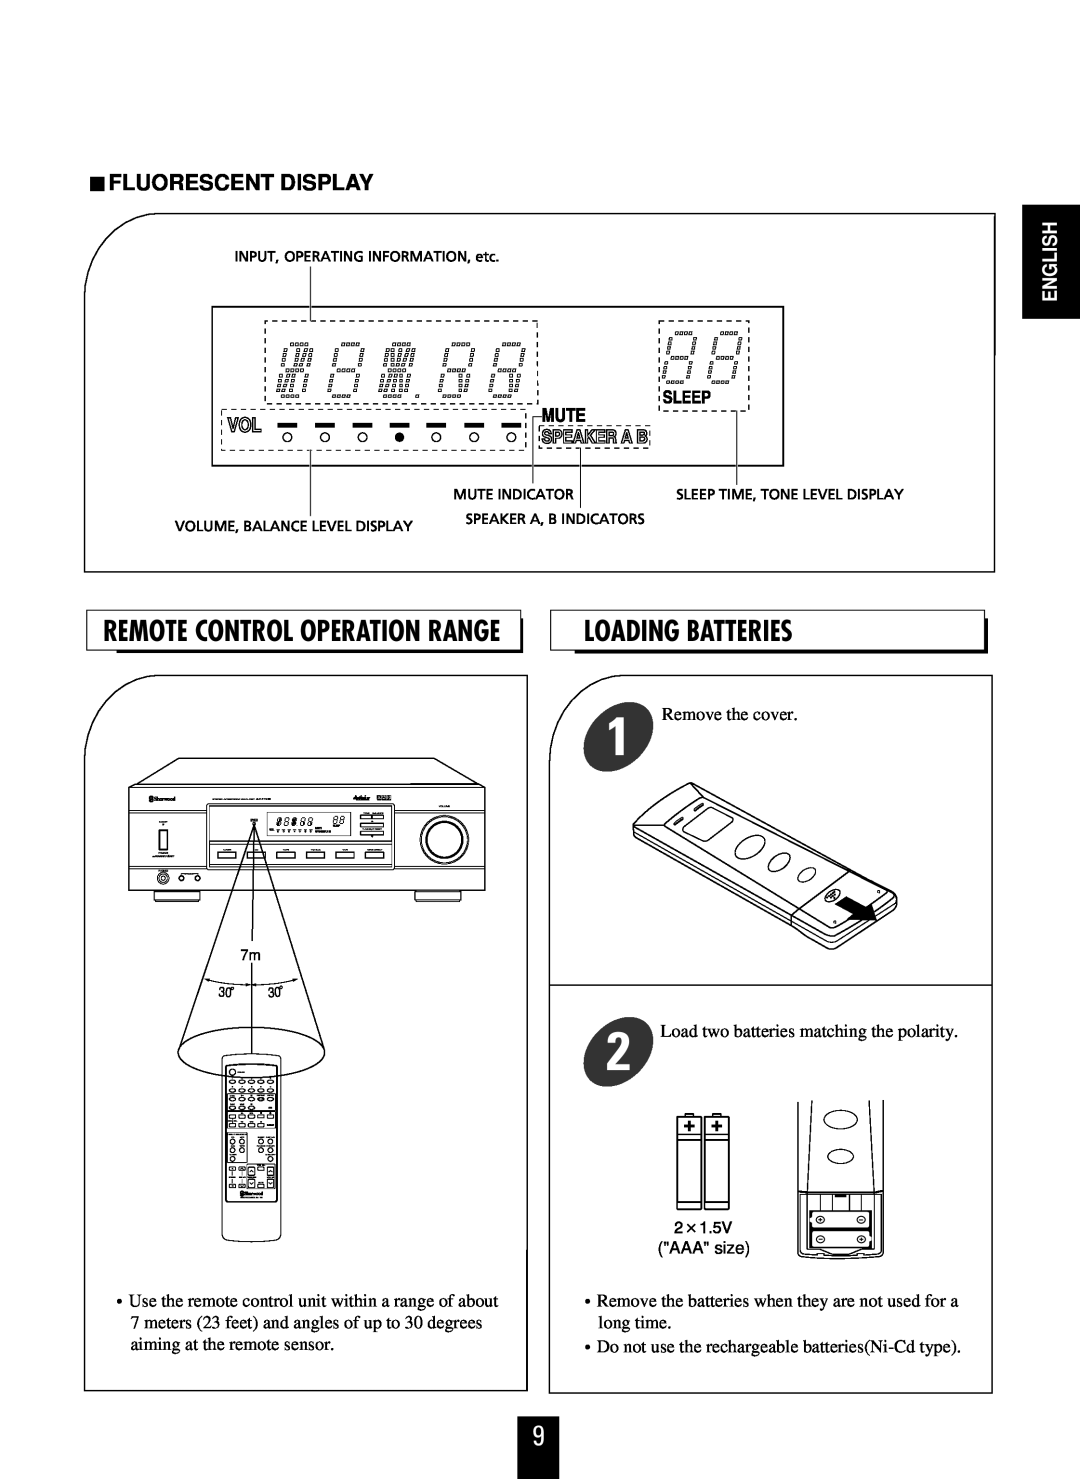 Sherwood AX-4103 operating instructions Loading Batteries, Fluorescent Display, Remote Control Operation Range, English 